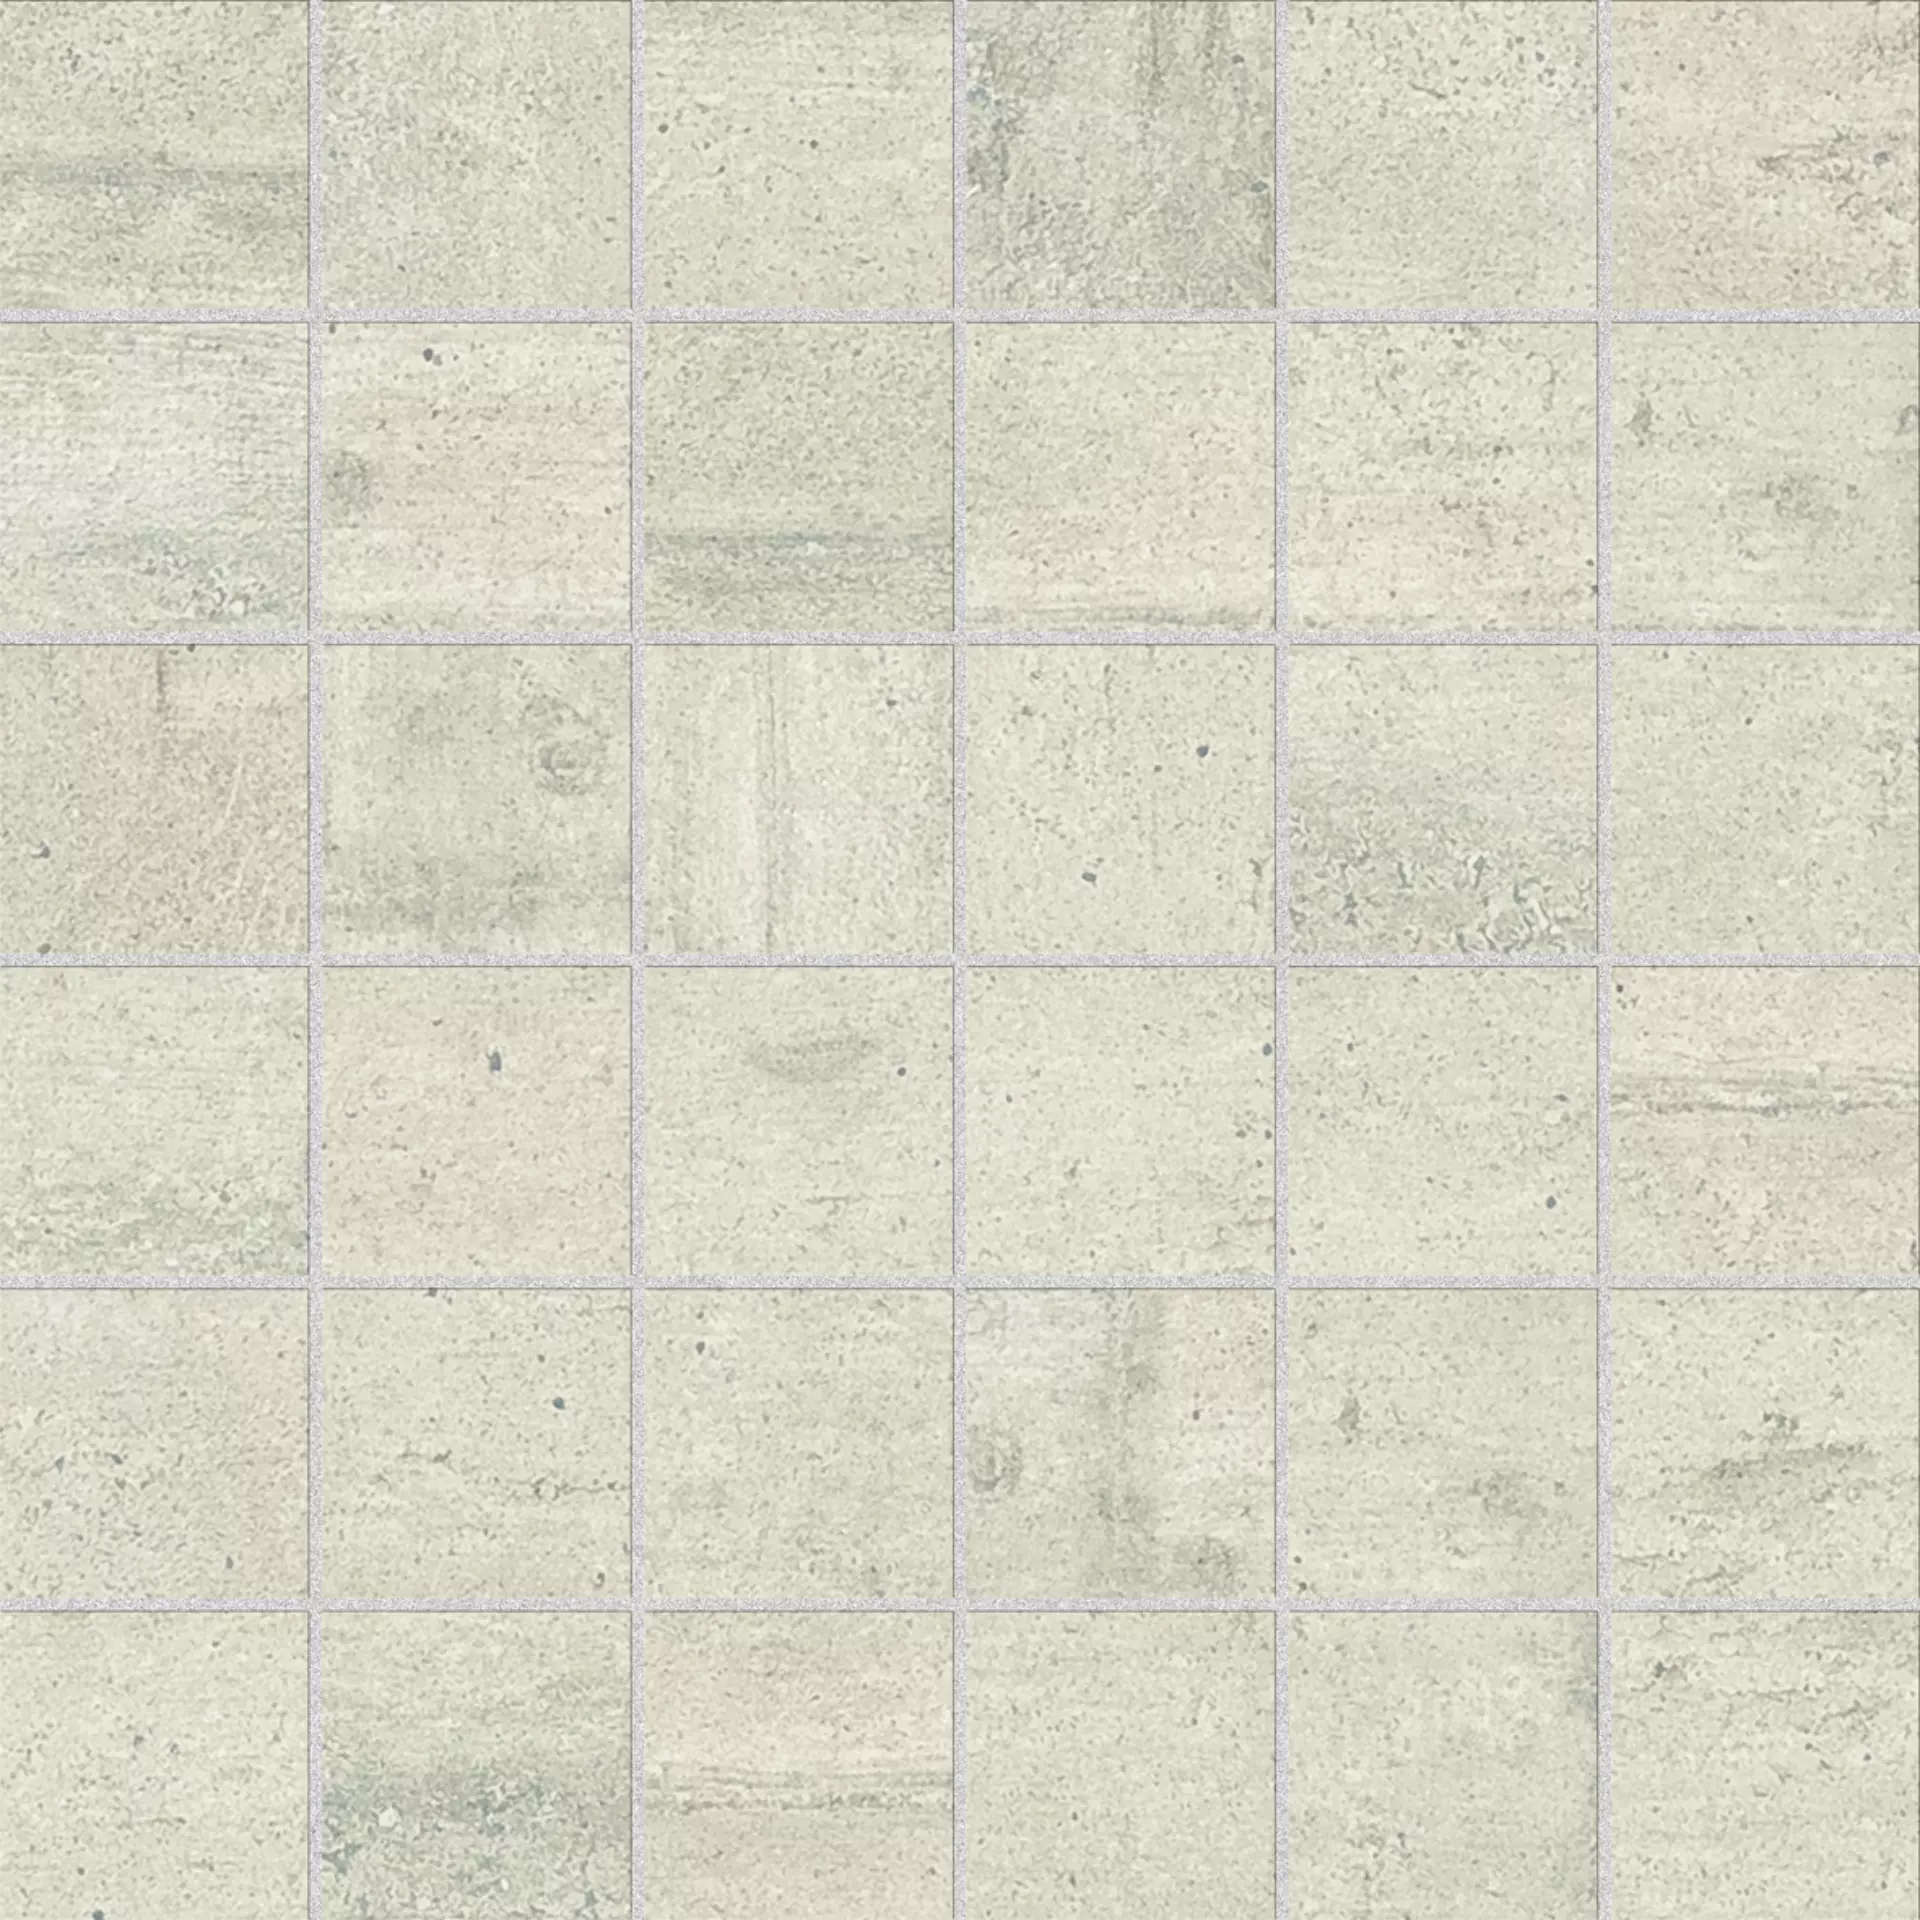 Provenza Re-Use Calce Naturale Mosaic 4,8x4,8 E1R0 30x30cm rectified 9,5mm